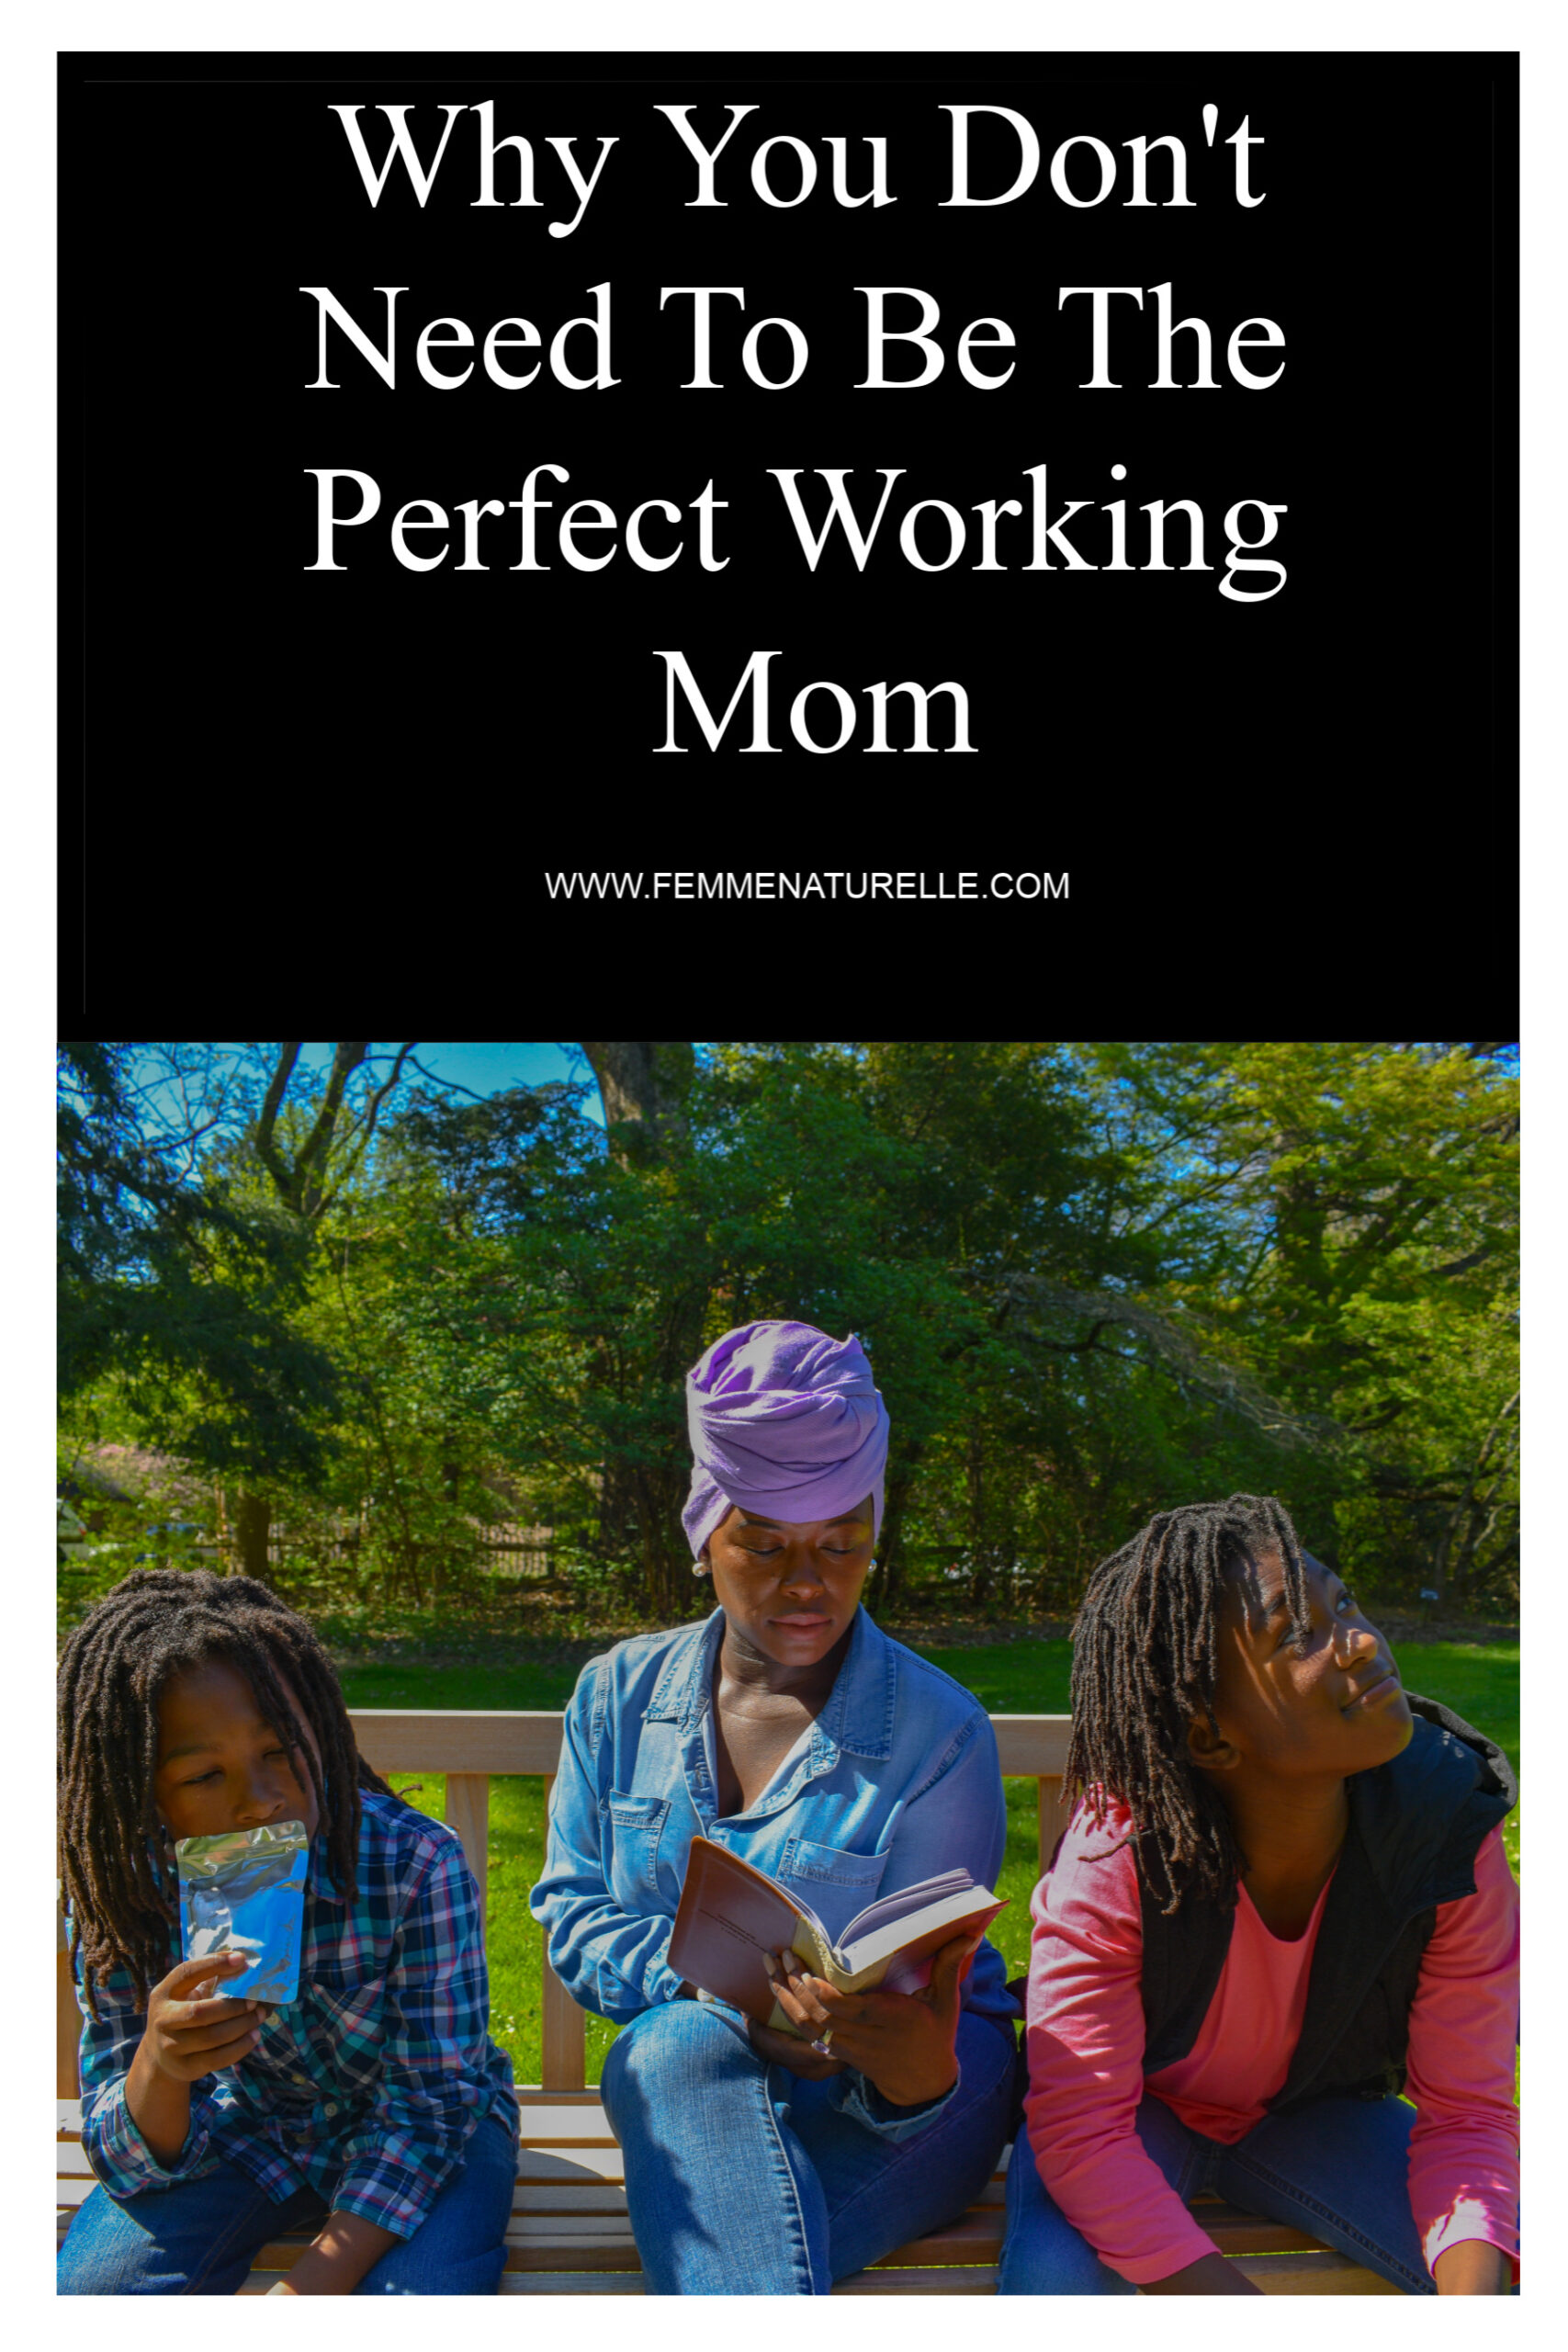 Why You Don't Need To Be The Perfect Working Mom